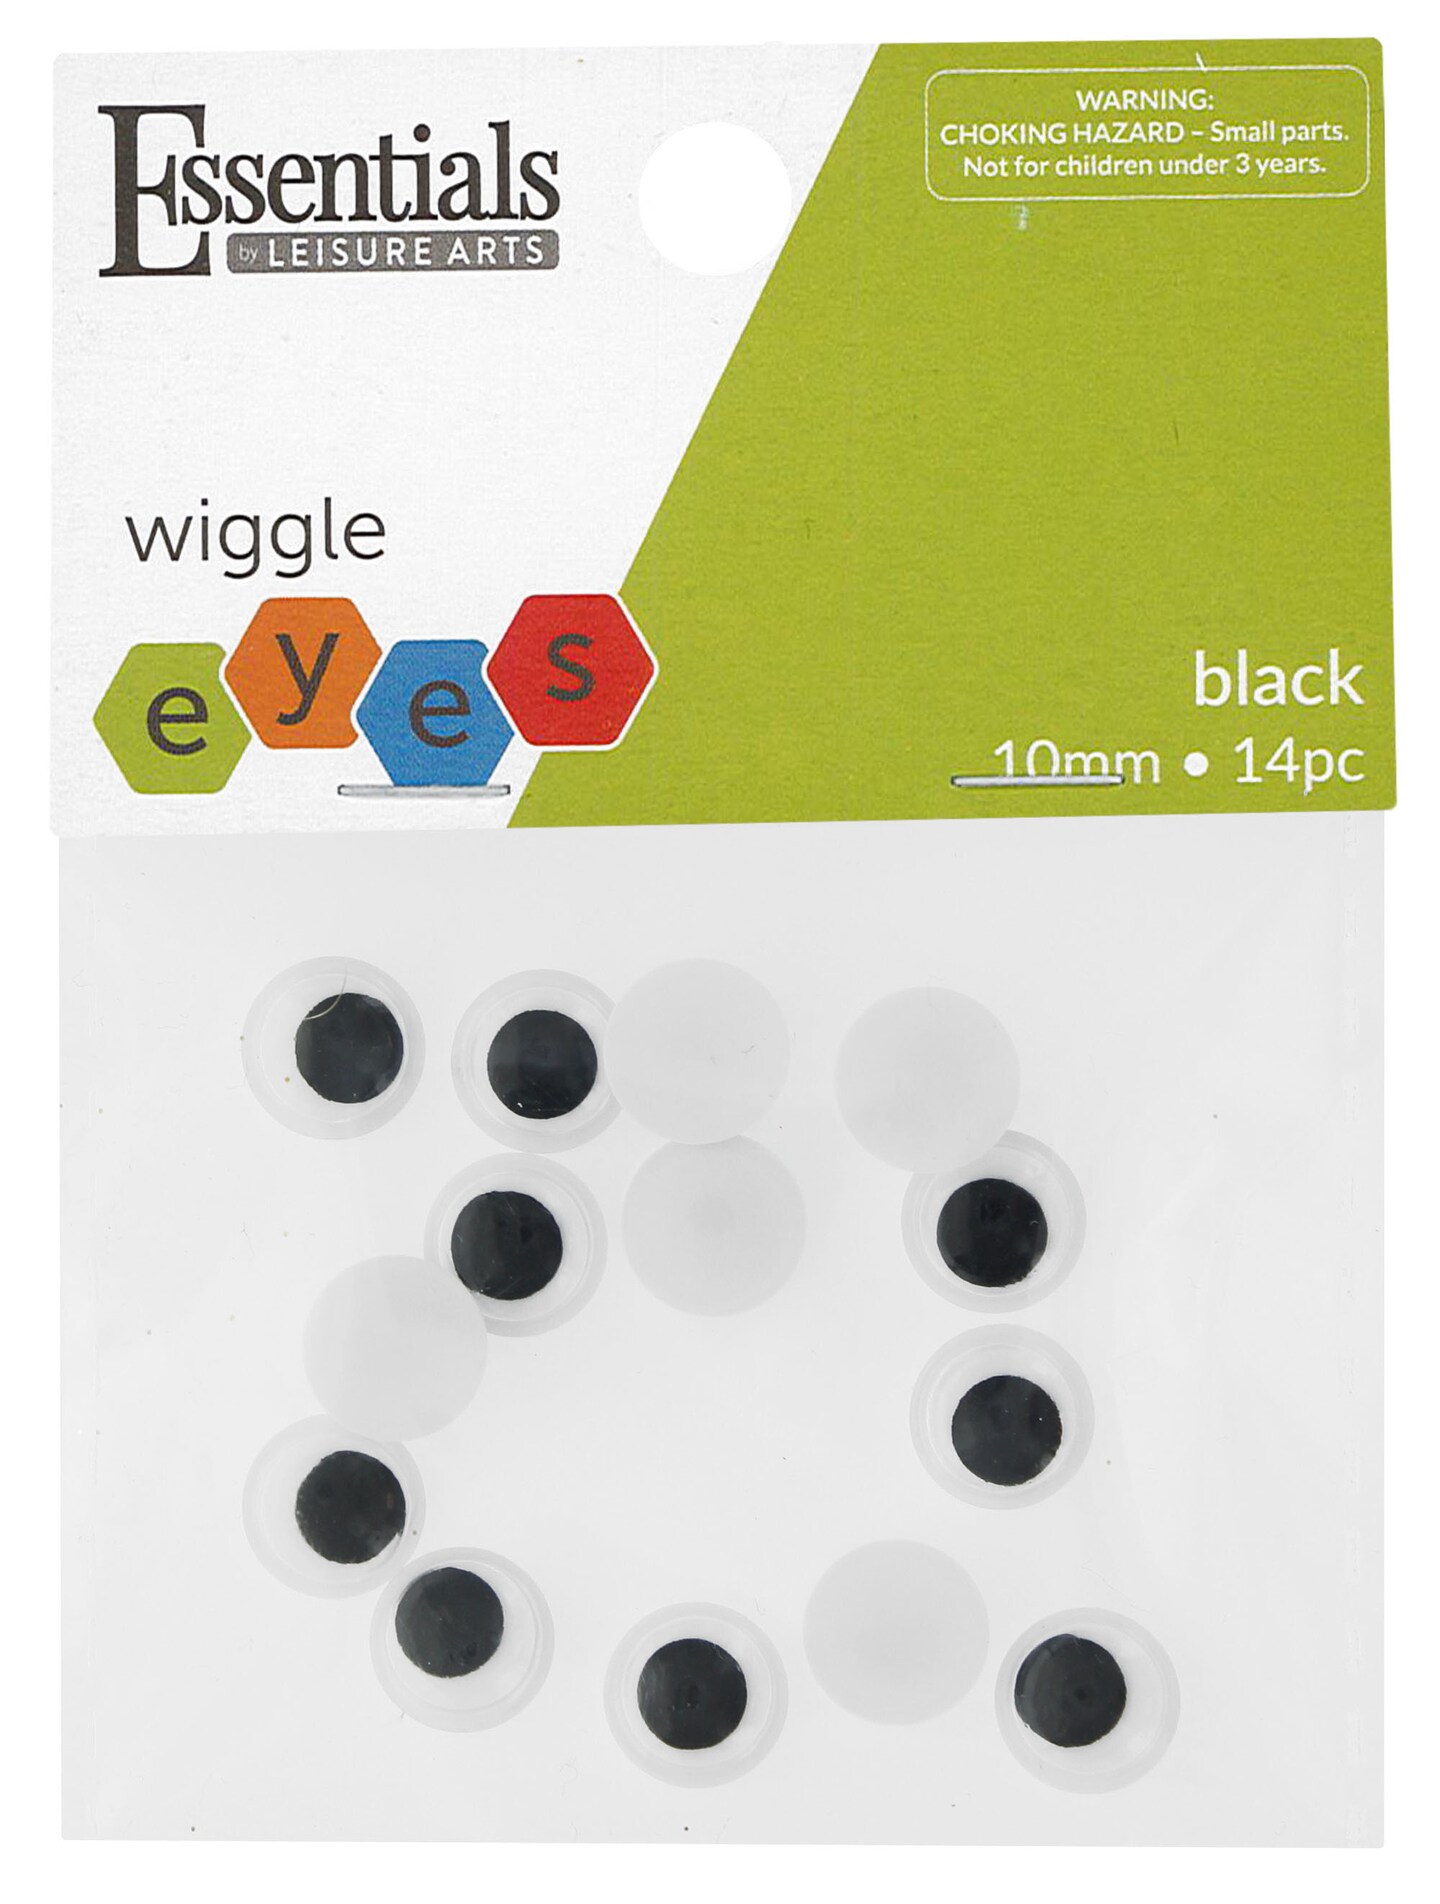 Essentials by Leisure Arts Eyes Paste On Moveable 10mm Black 14pc Googly Eyes, Google Eyes for Crafts, Big Googly Eyes for Crafts, Wiggle Eyes, Craft Eyes